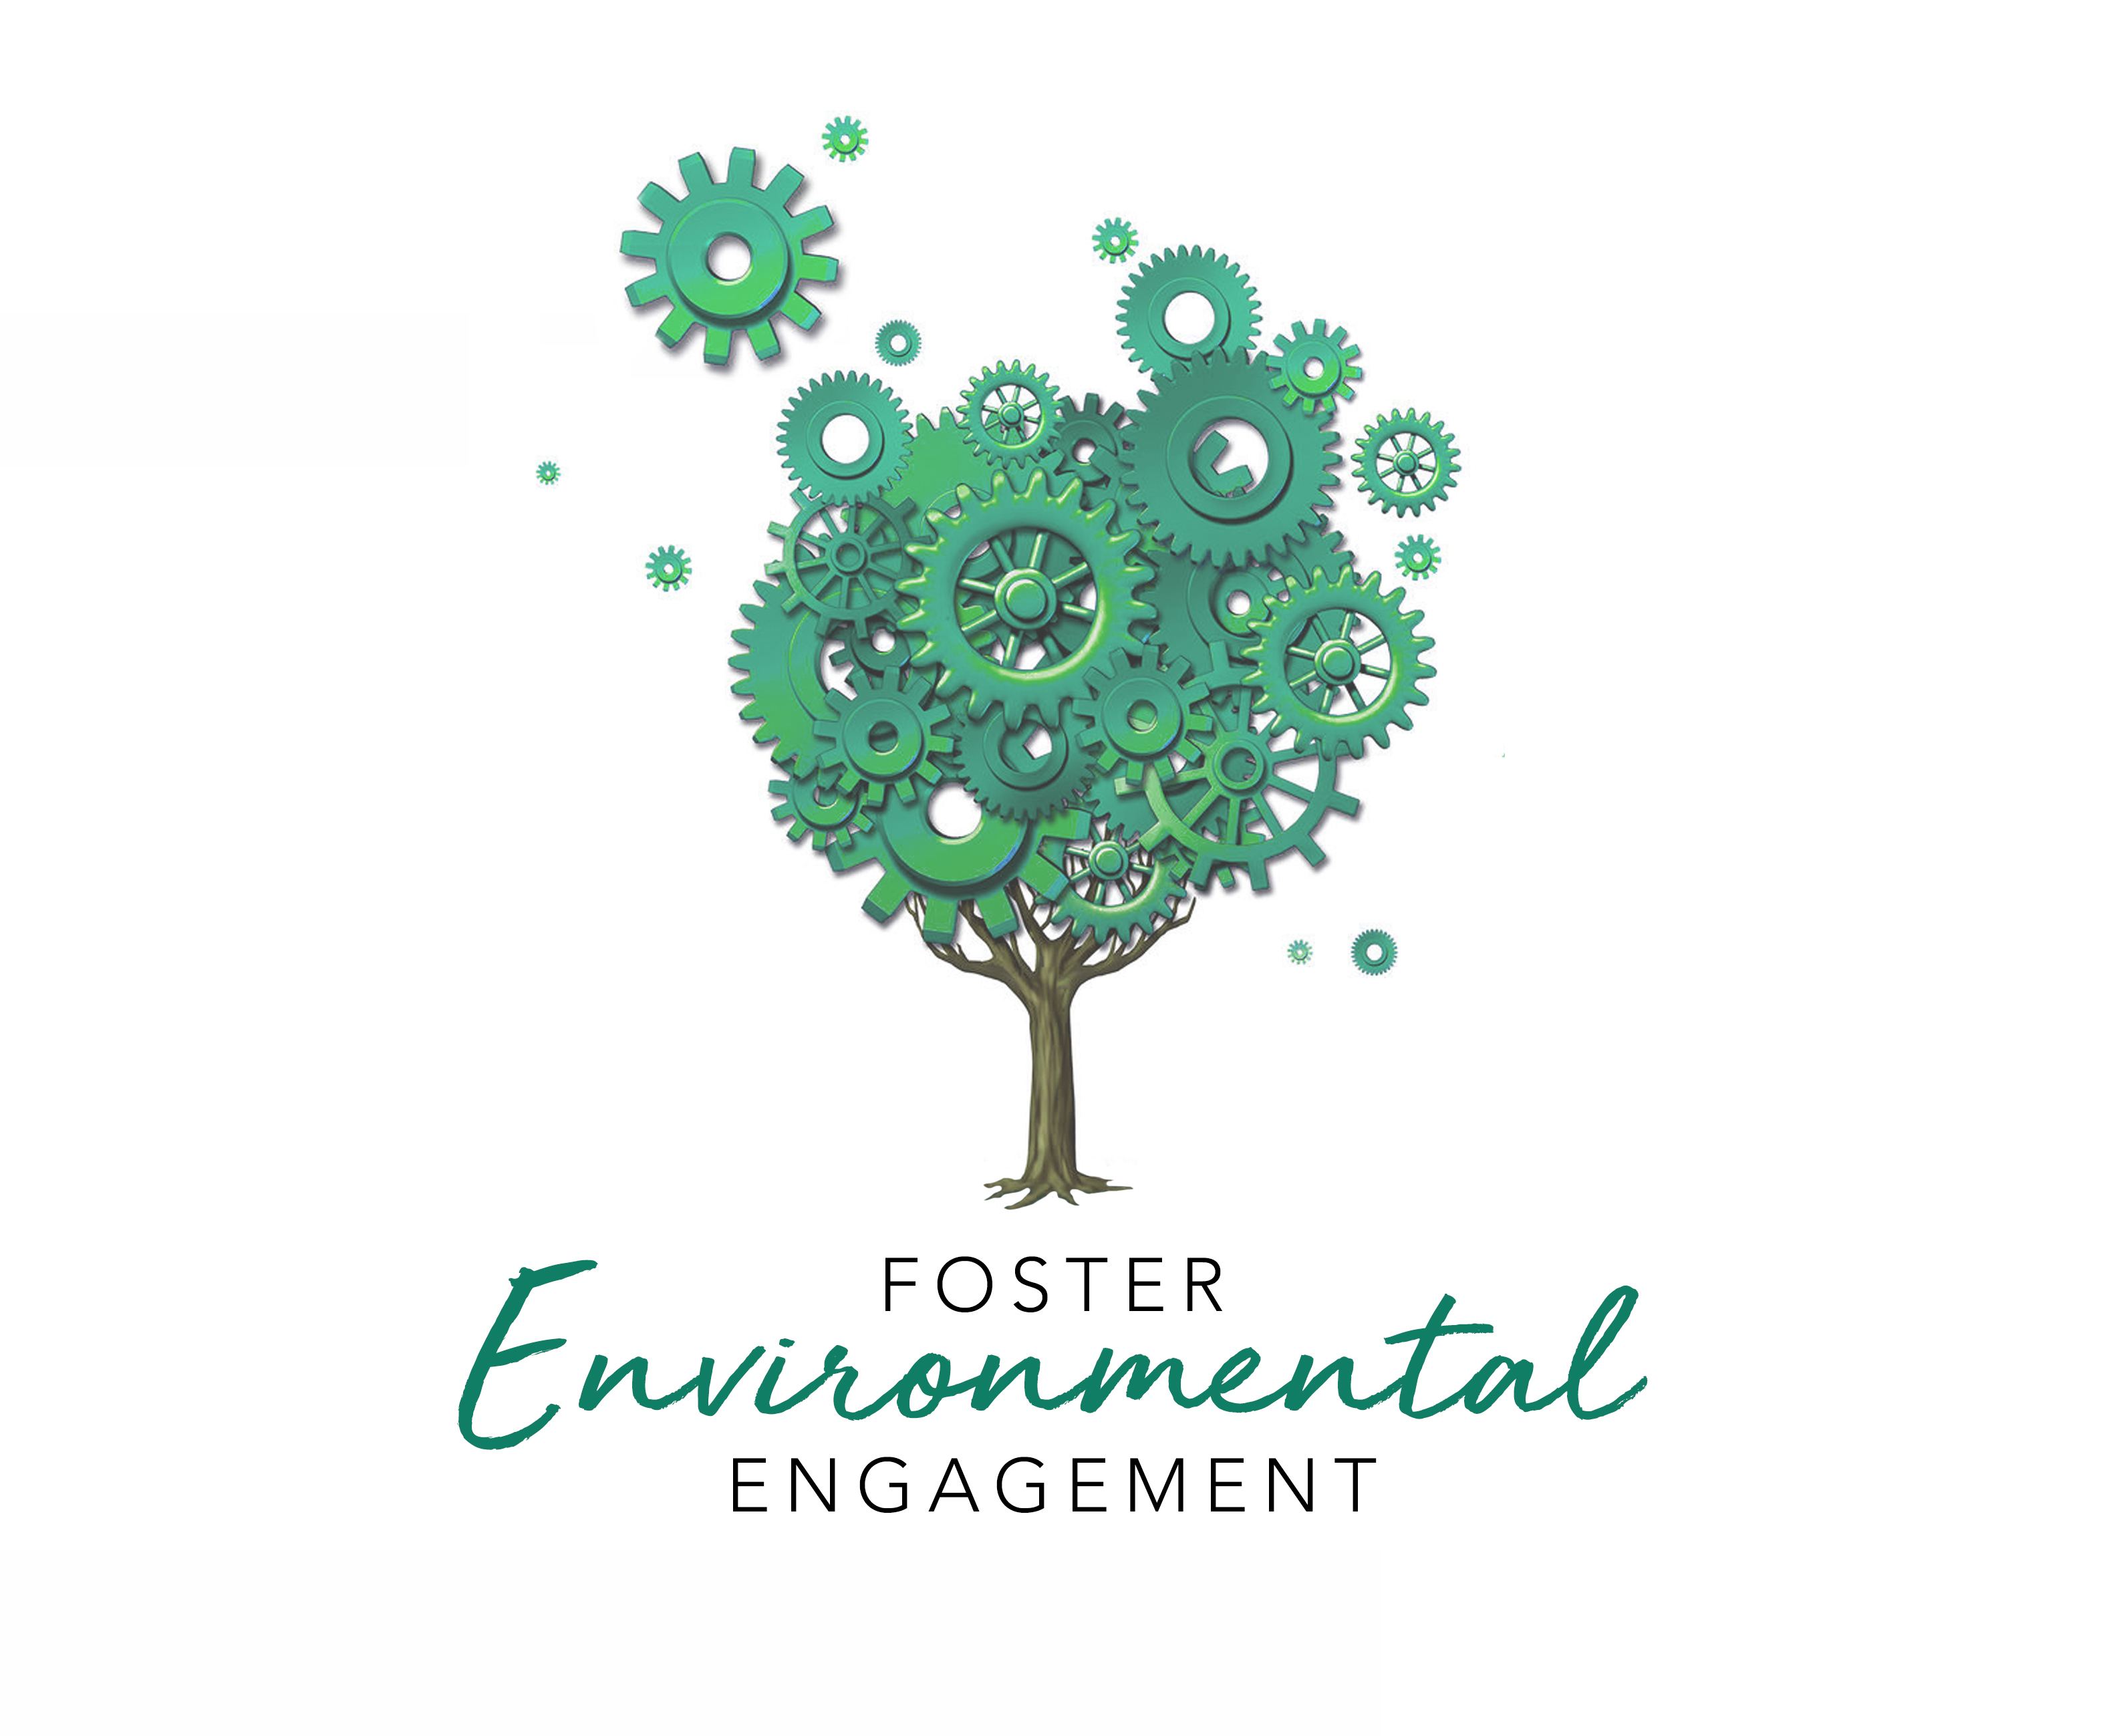 8 Ways Facilitators Can Foster Environmental Engagement in the Virtual Classroom